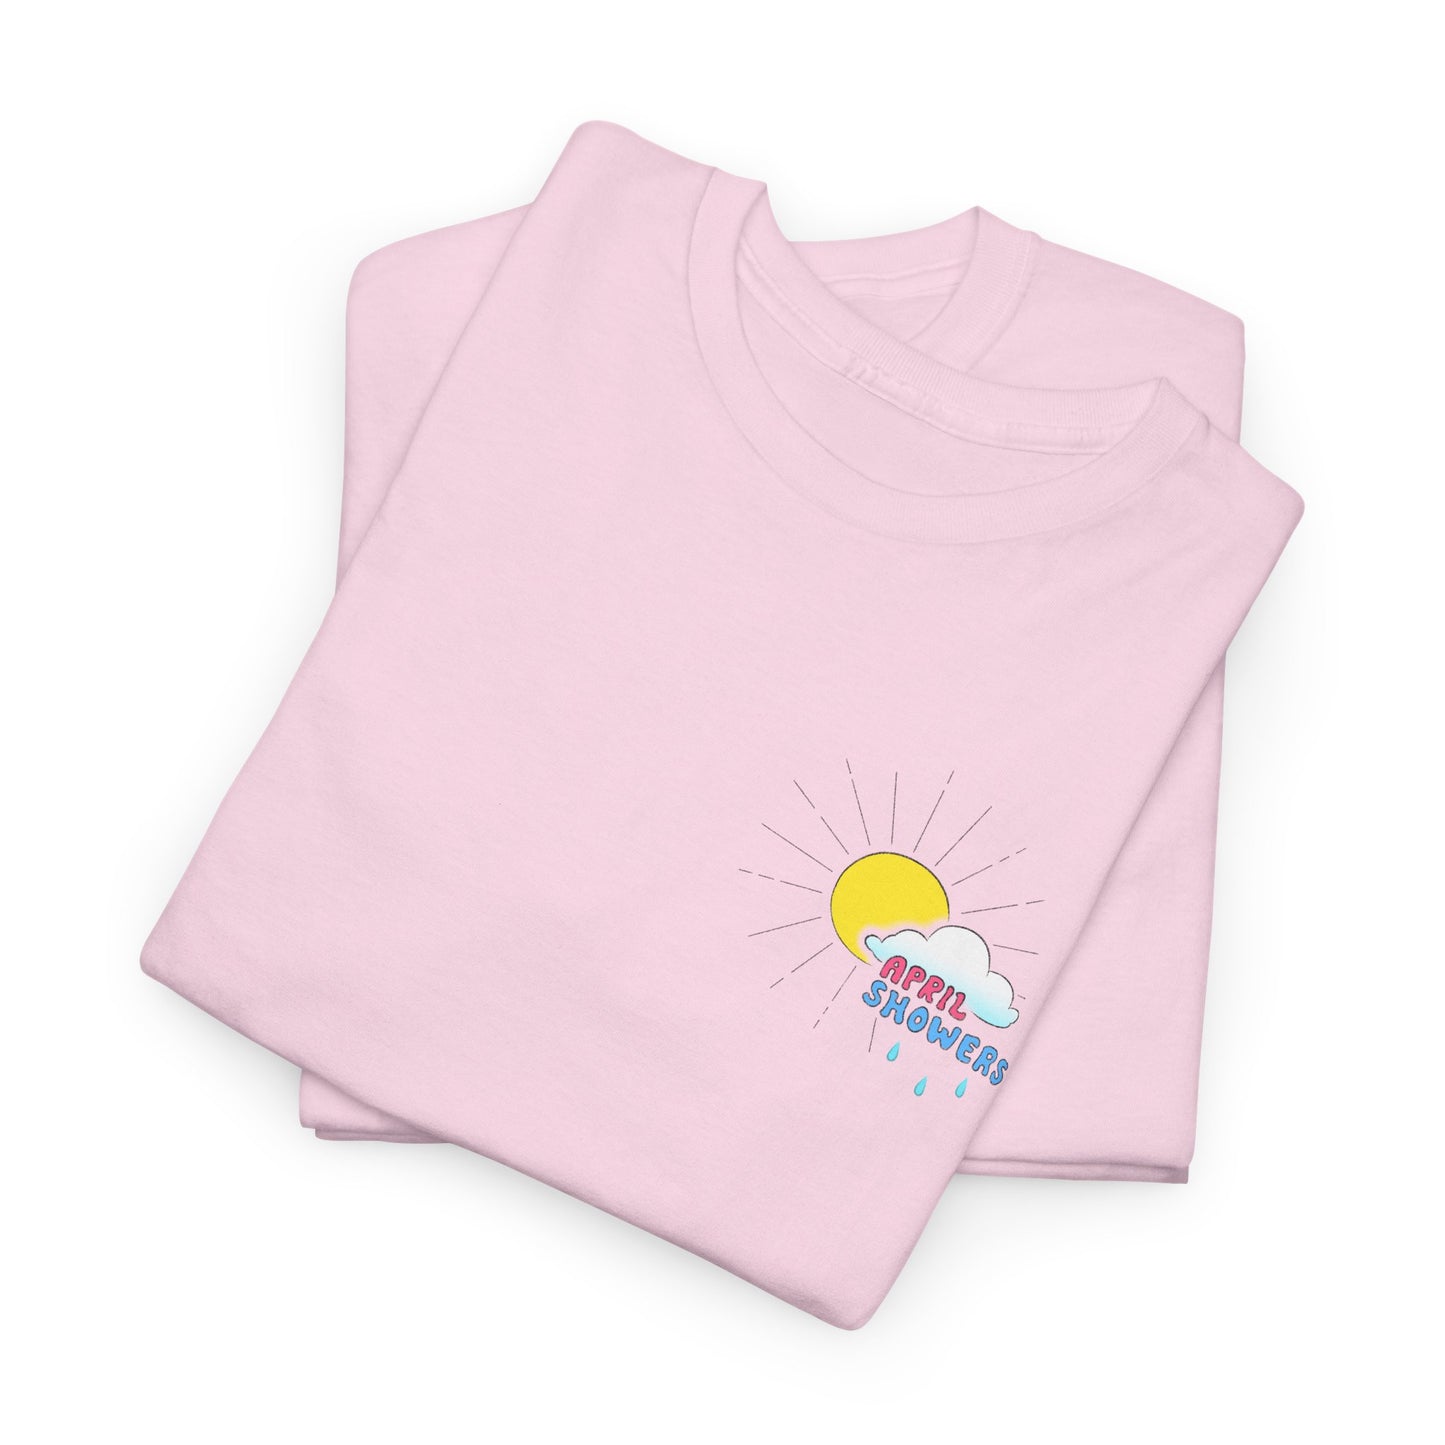 April Showers Tee